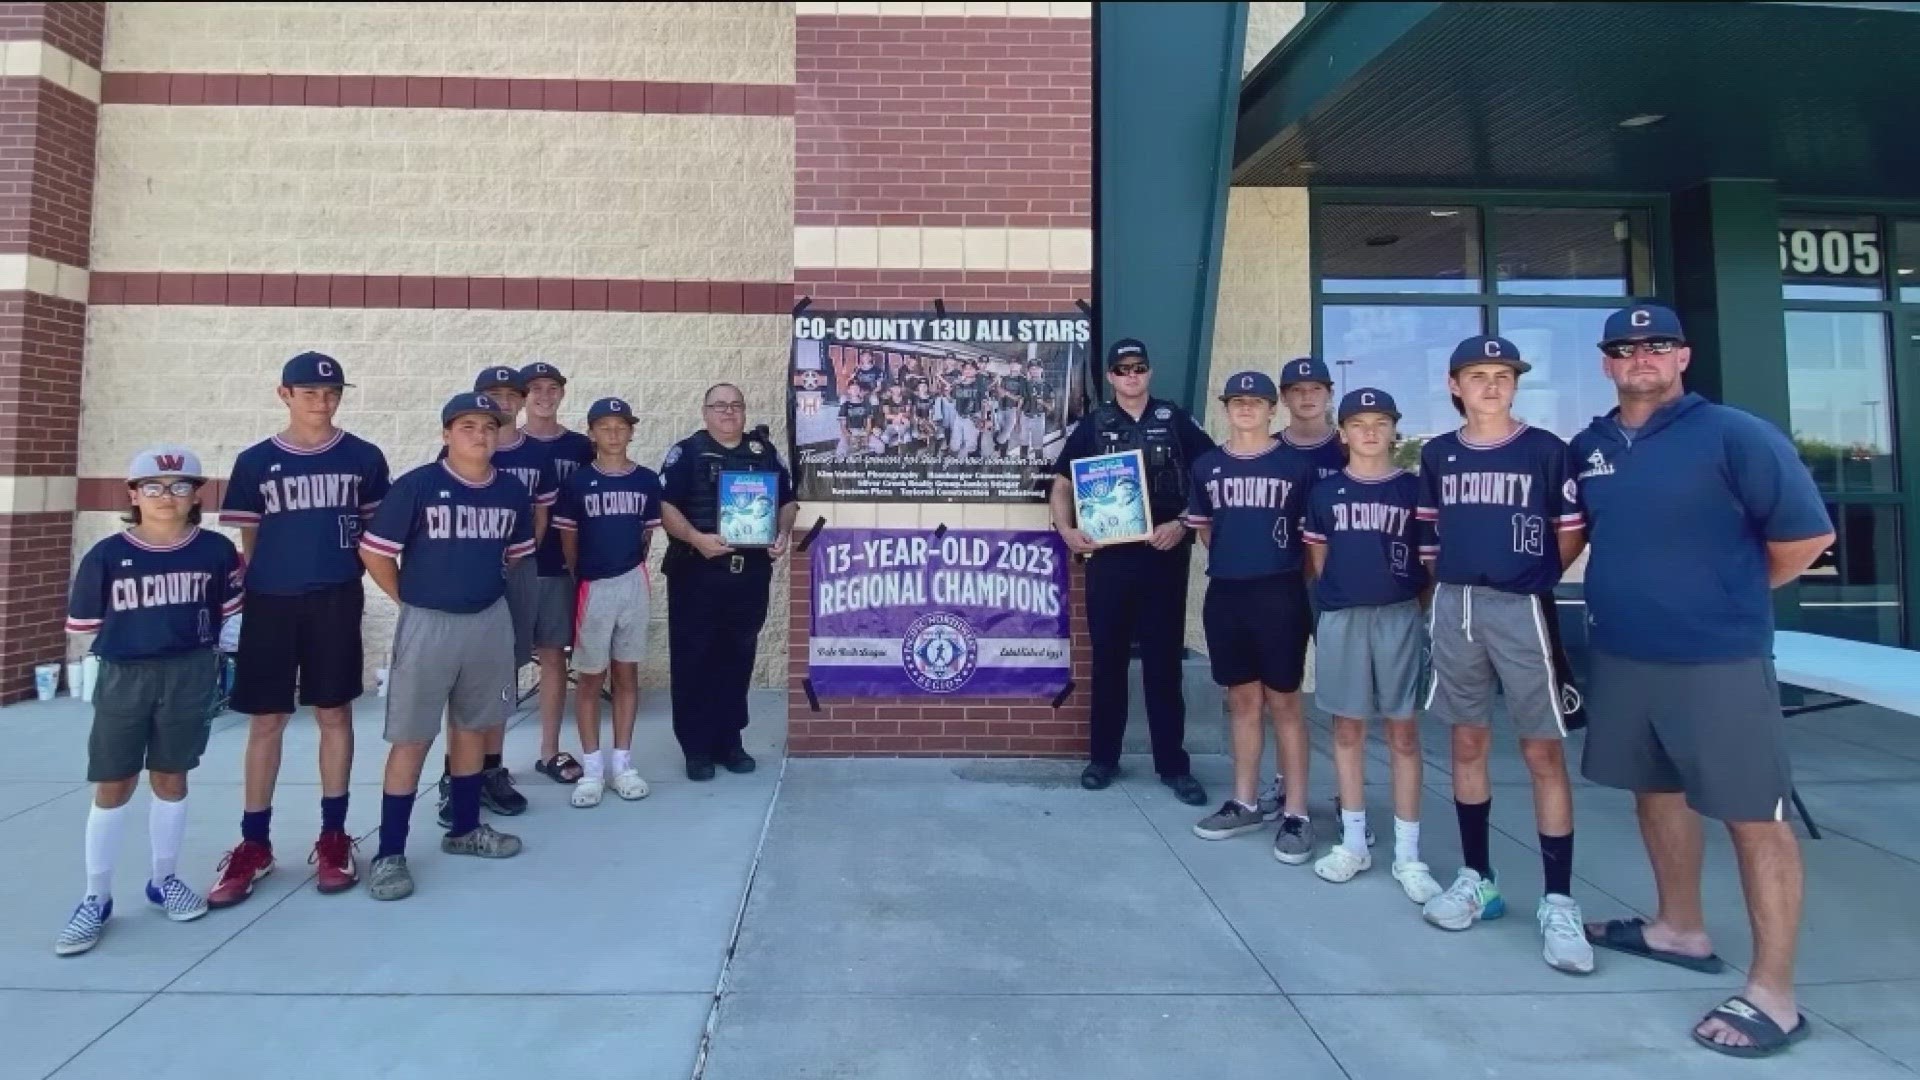 The Co-County 13U boys baseball team won the Pacific Northwest regional championship over the weekend to secure a spot in the Babe Ruth World Series in August.